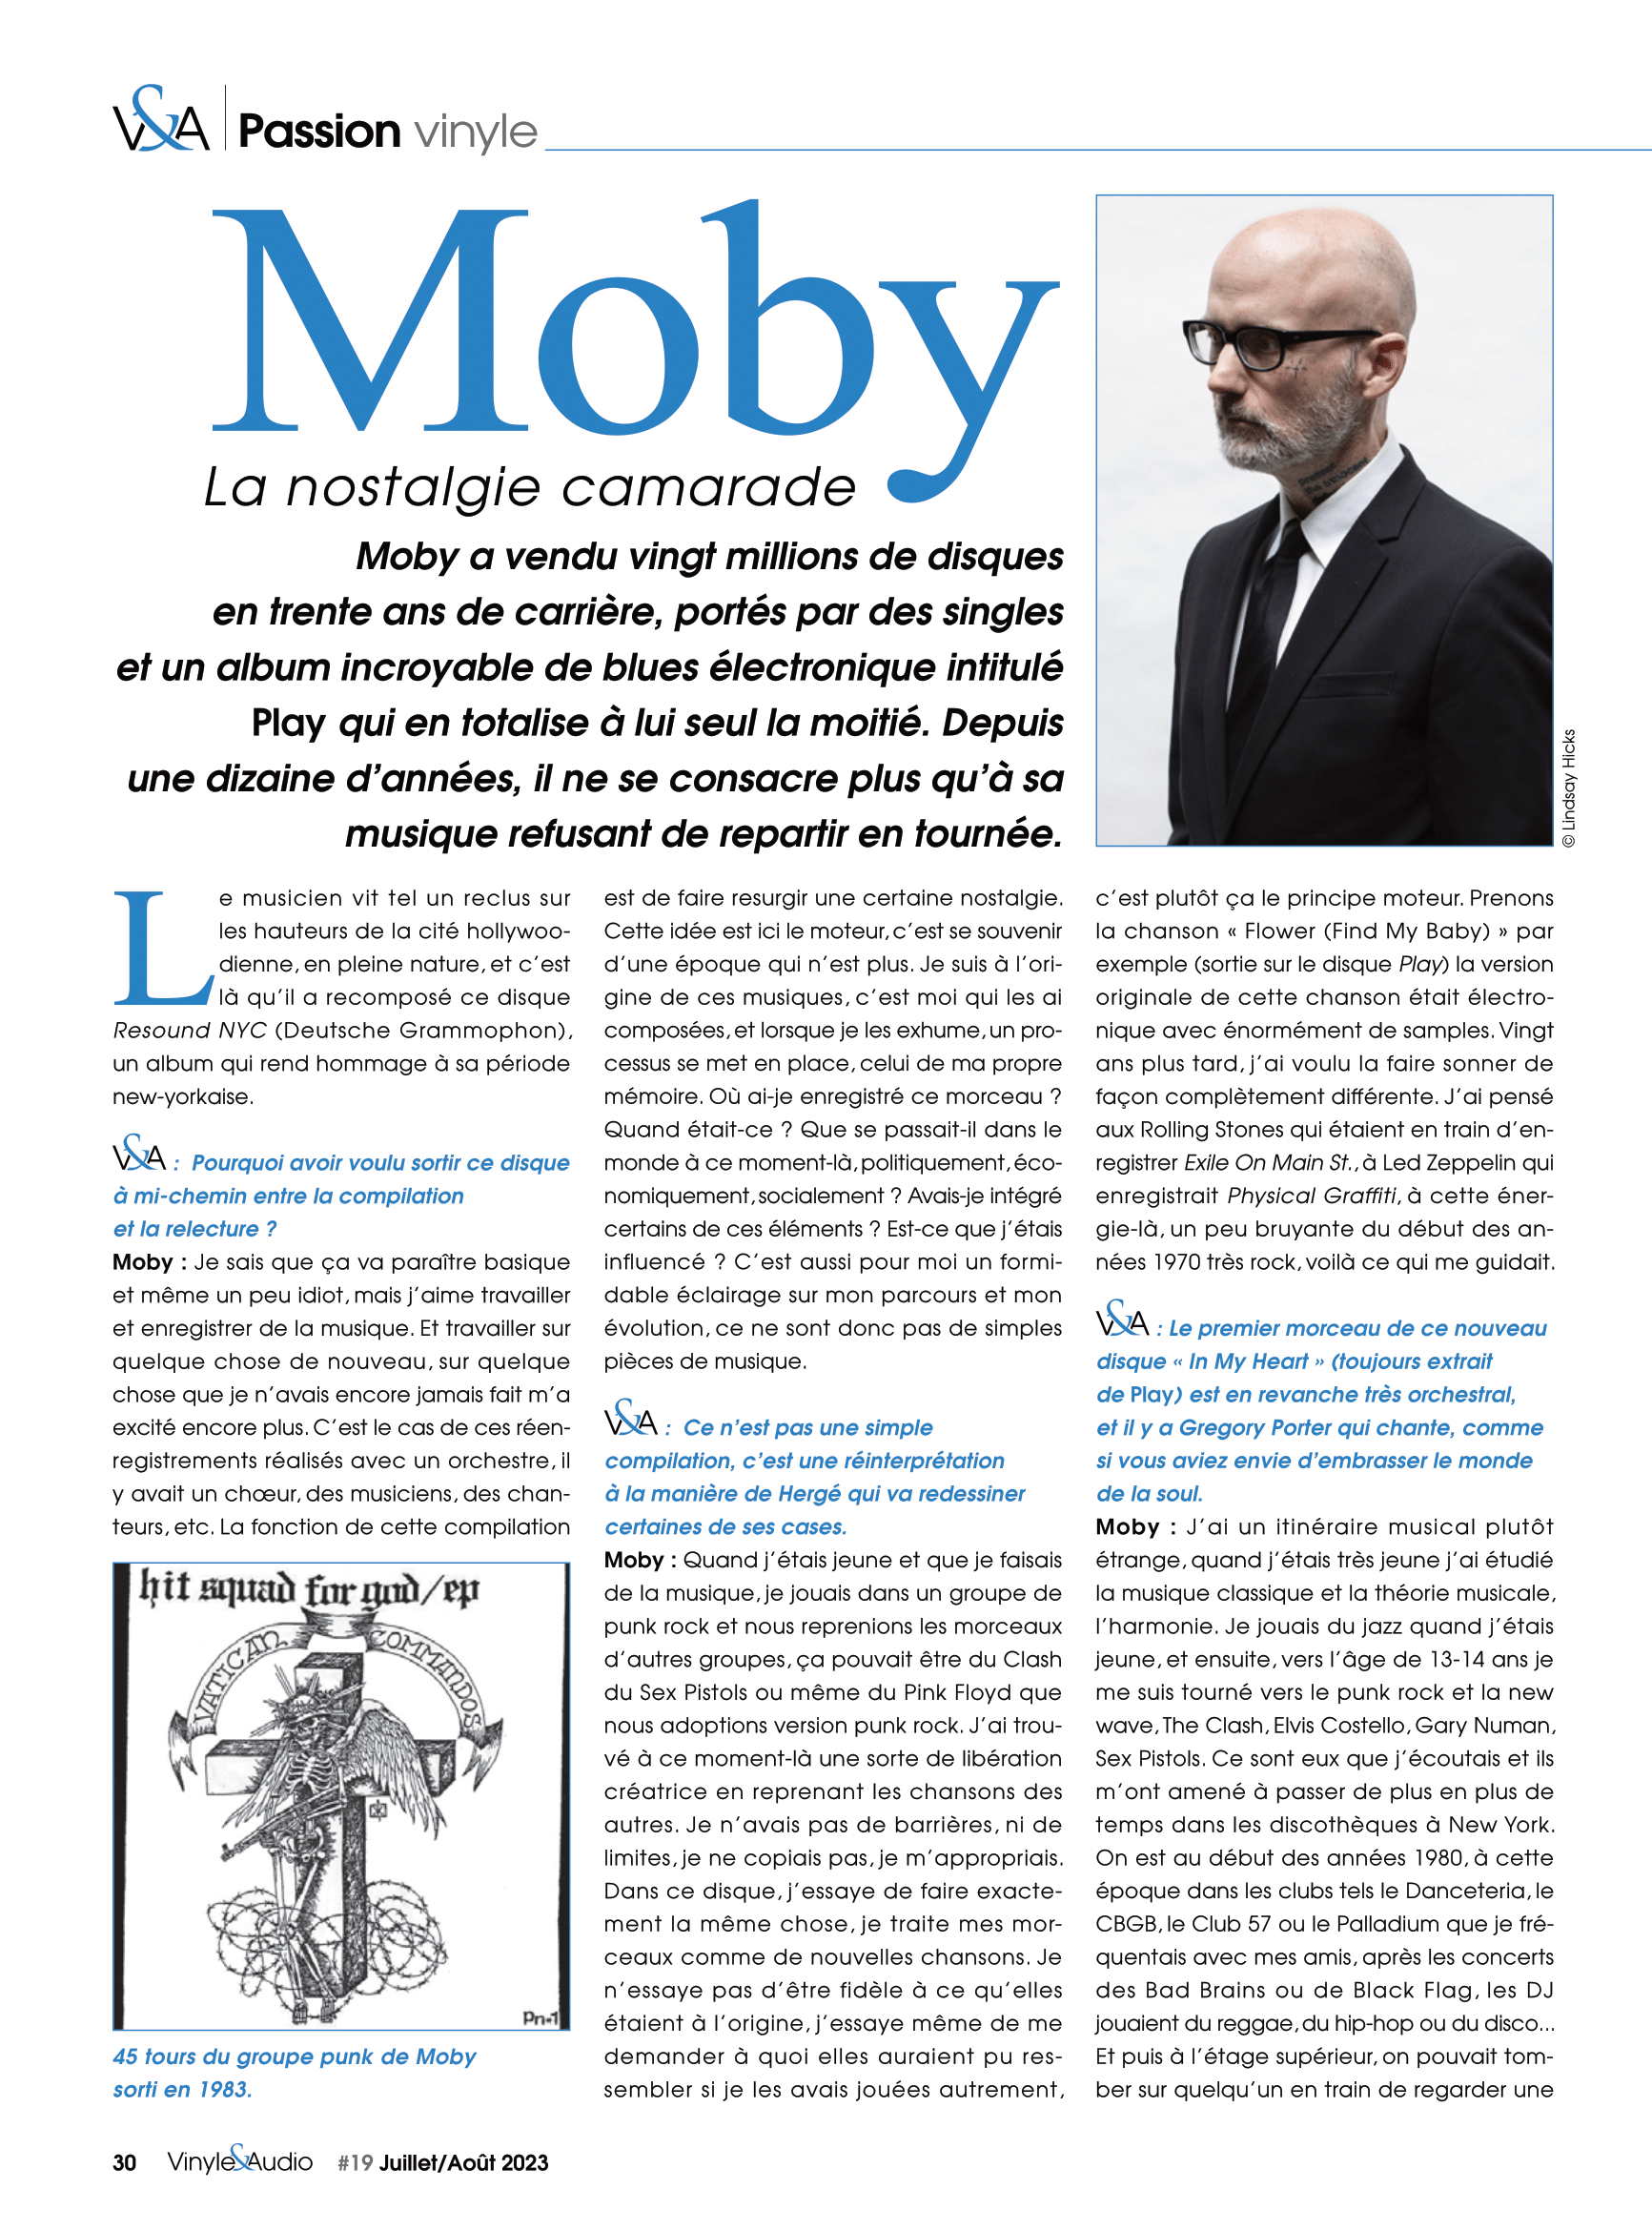 Passion vinyle : Moby